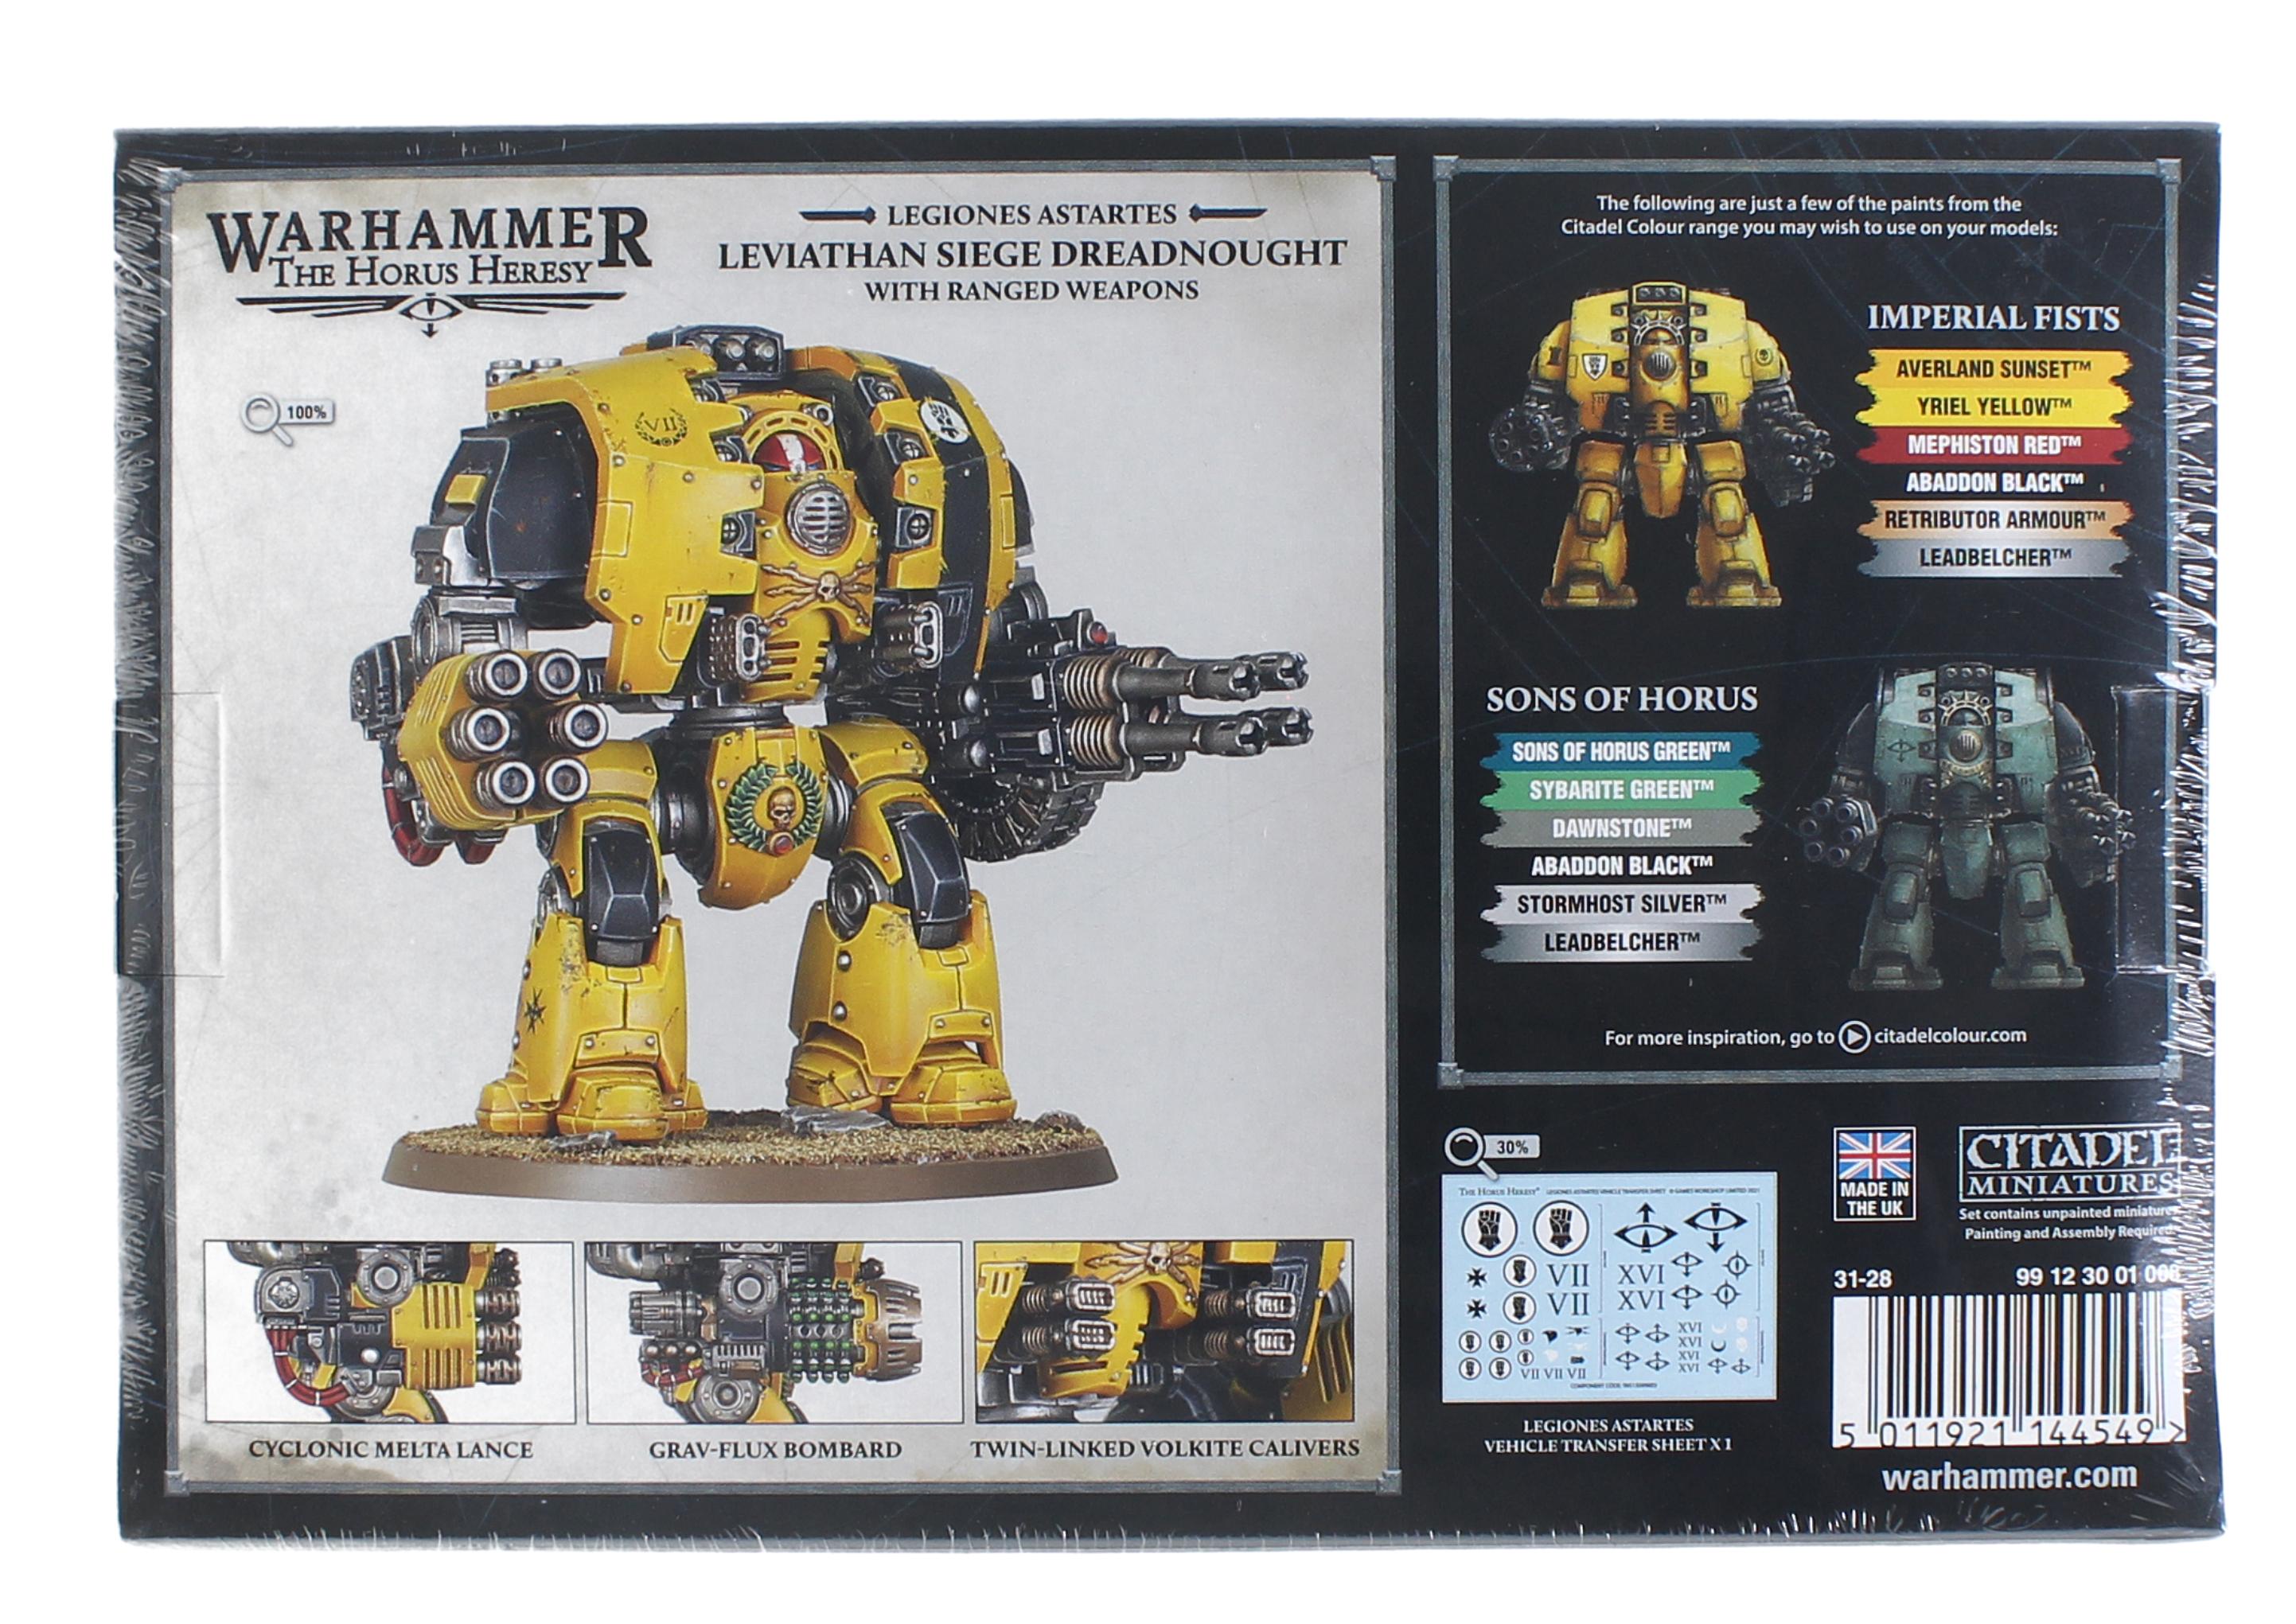 Warhammer 40K: Horus Heresy - Leviathan Siege Dreadnought with